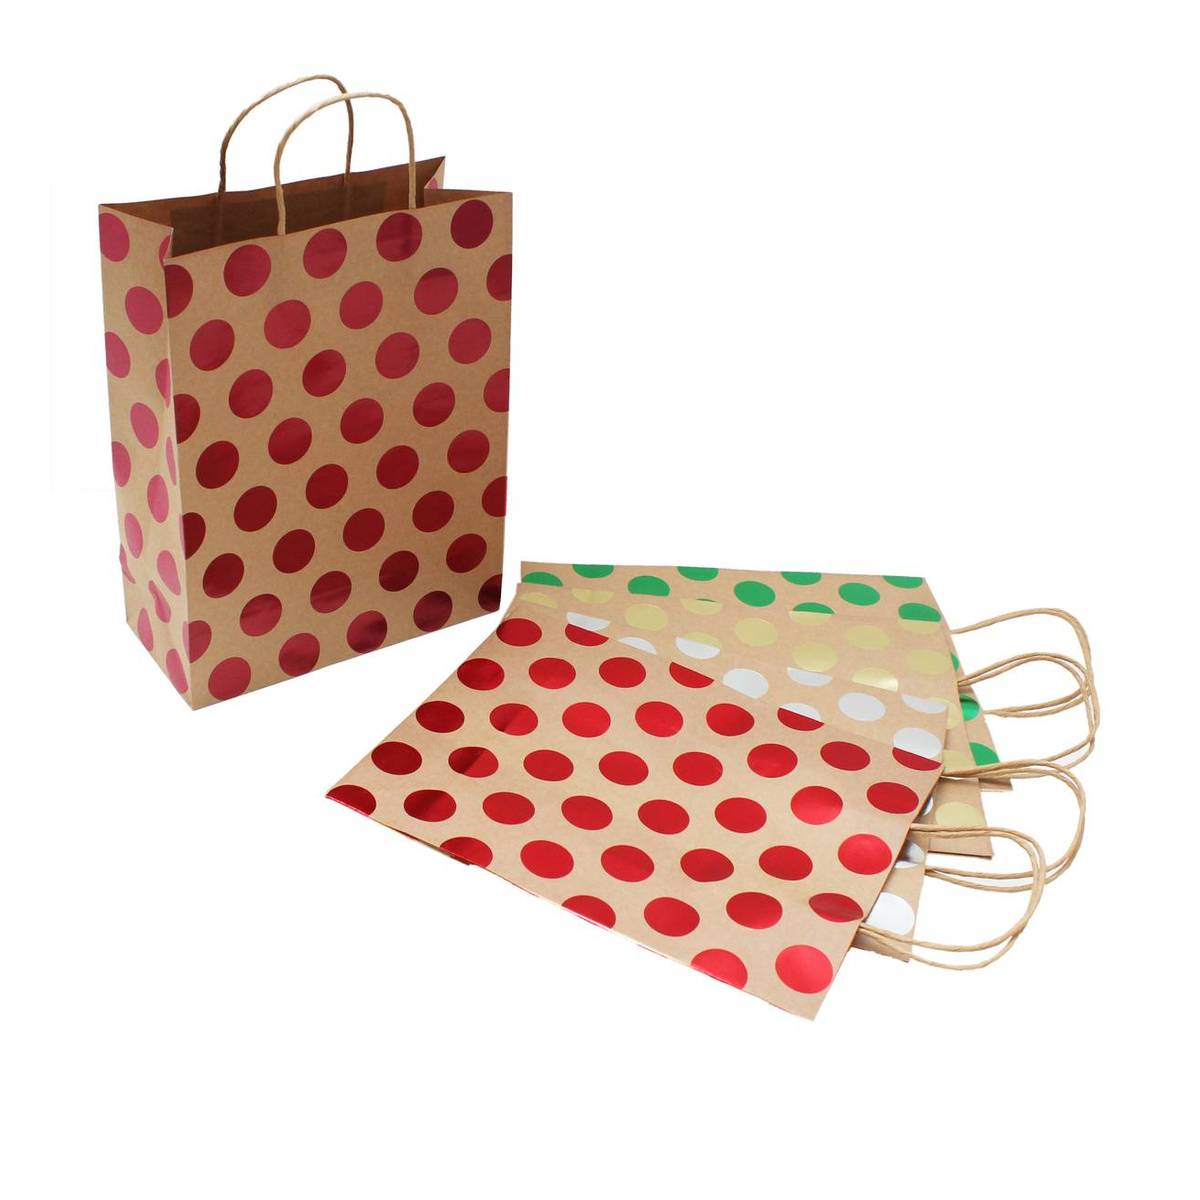 639149 1000 1 large spotted gift bags 5 pack